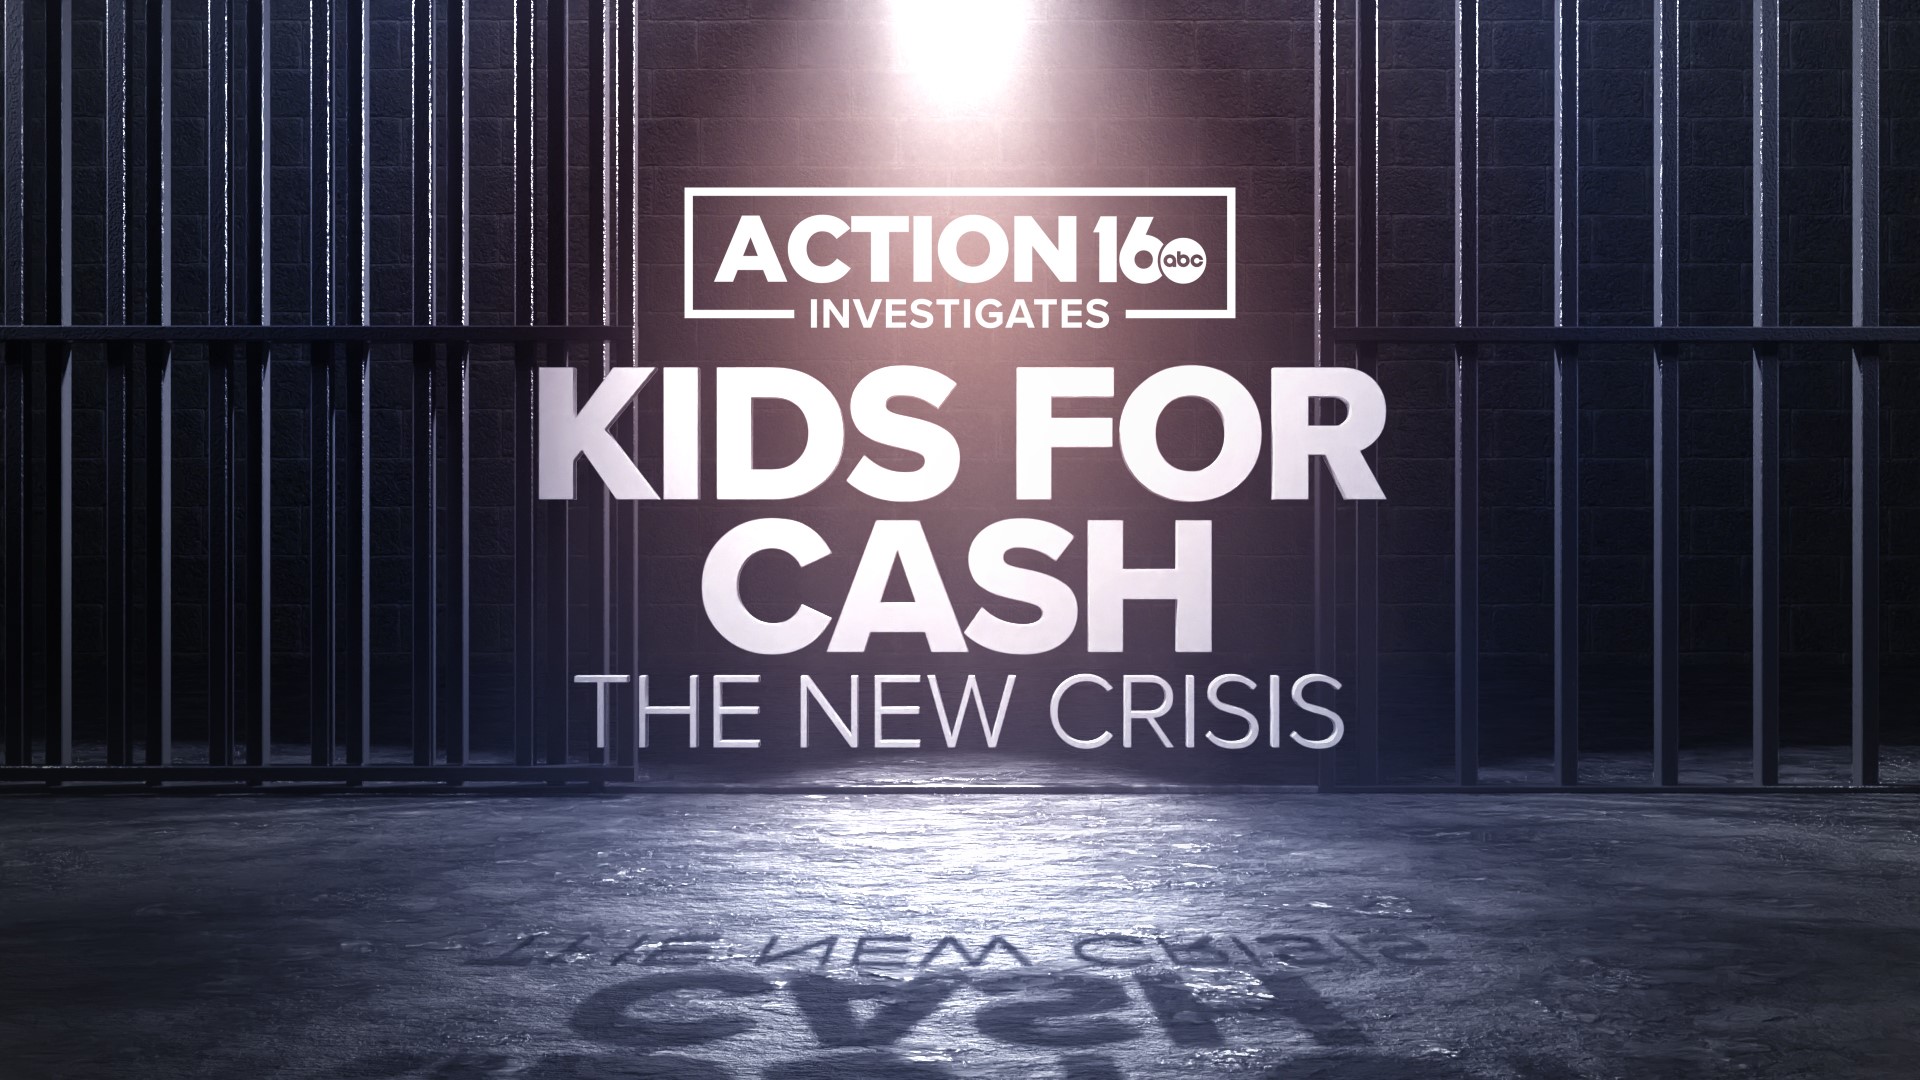 Now, more than a decade later, ‘Kids for Cash" continues to impact our communities and our schools.